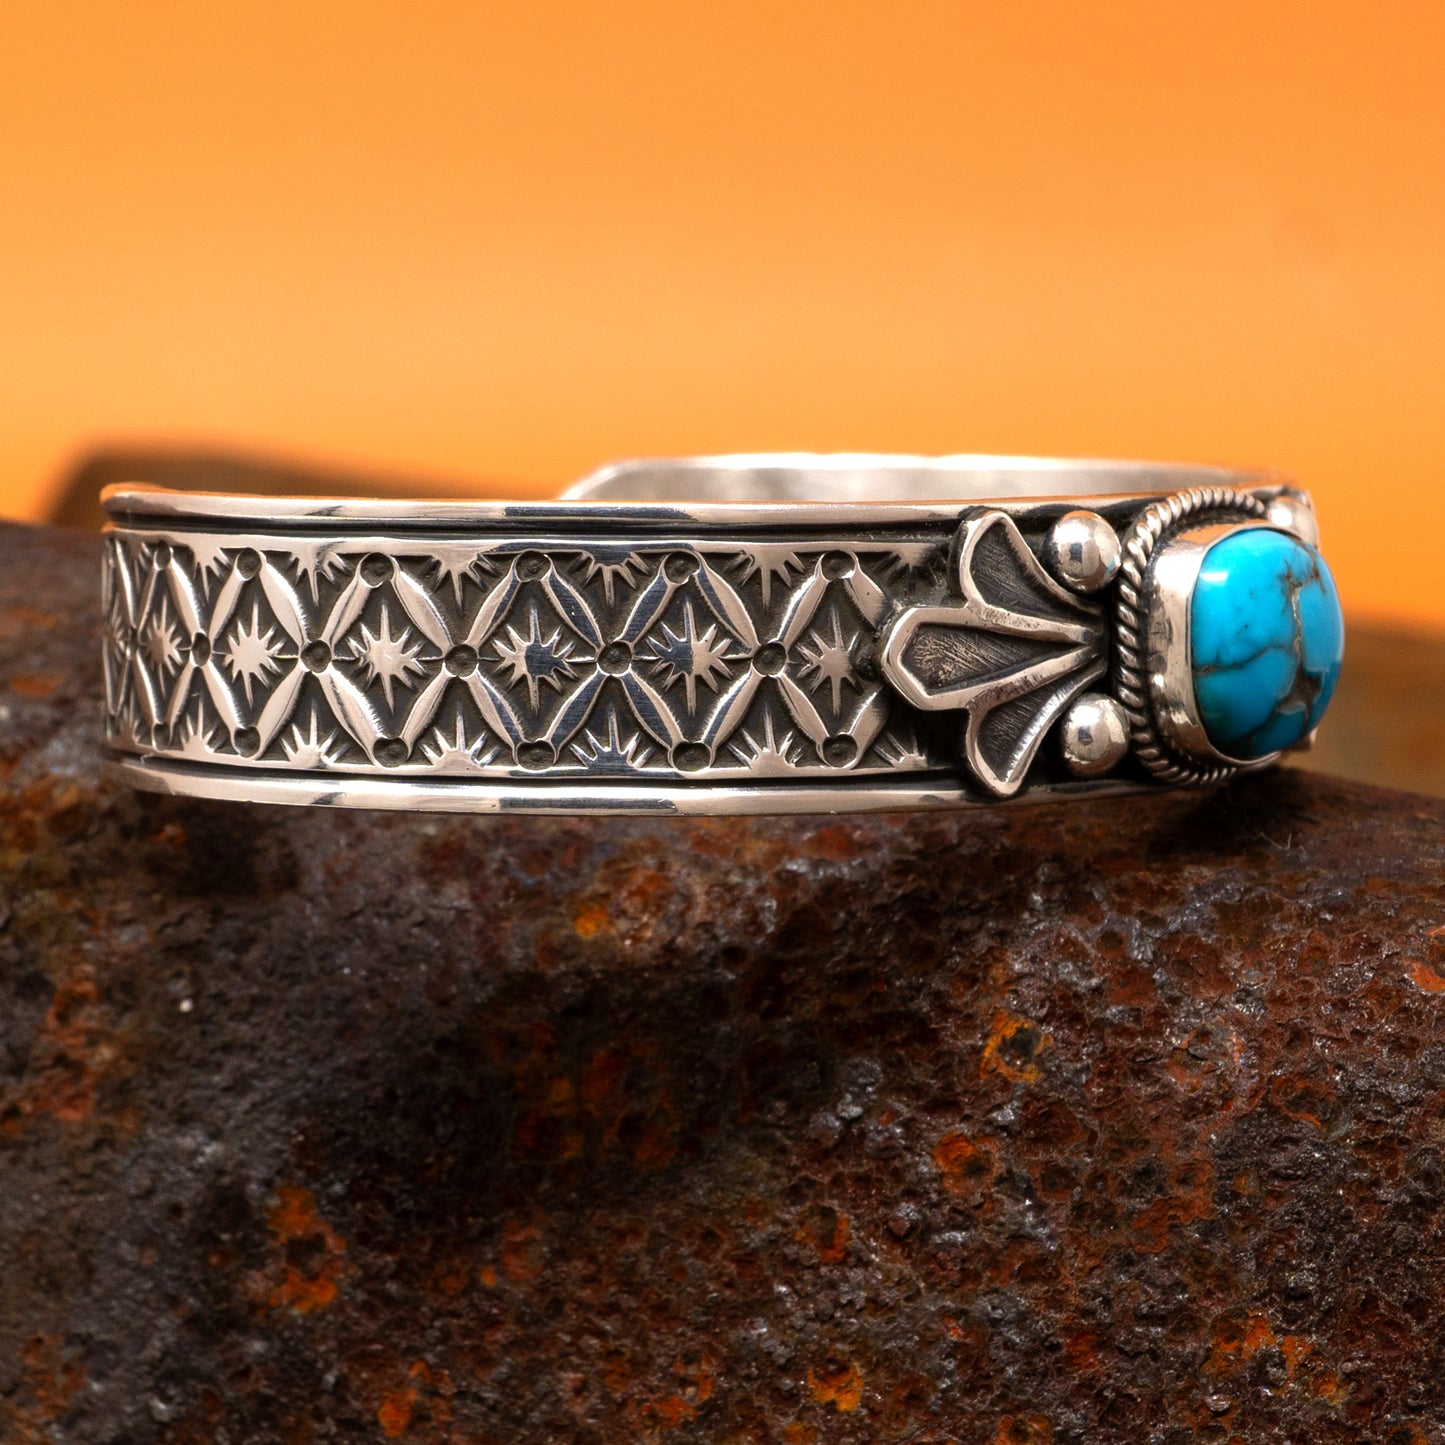 Apache Blue Turquoise in Stamped Silver Cuff Bracelet | Bo Reeves